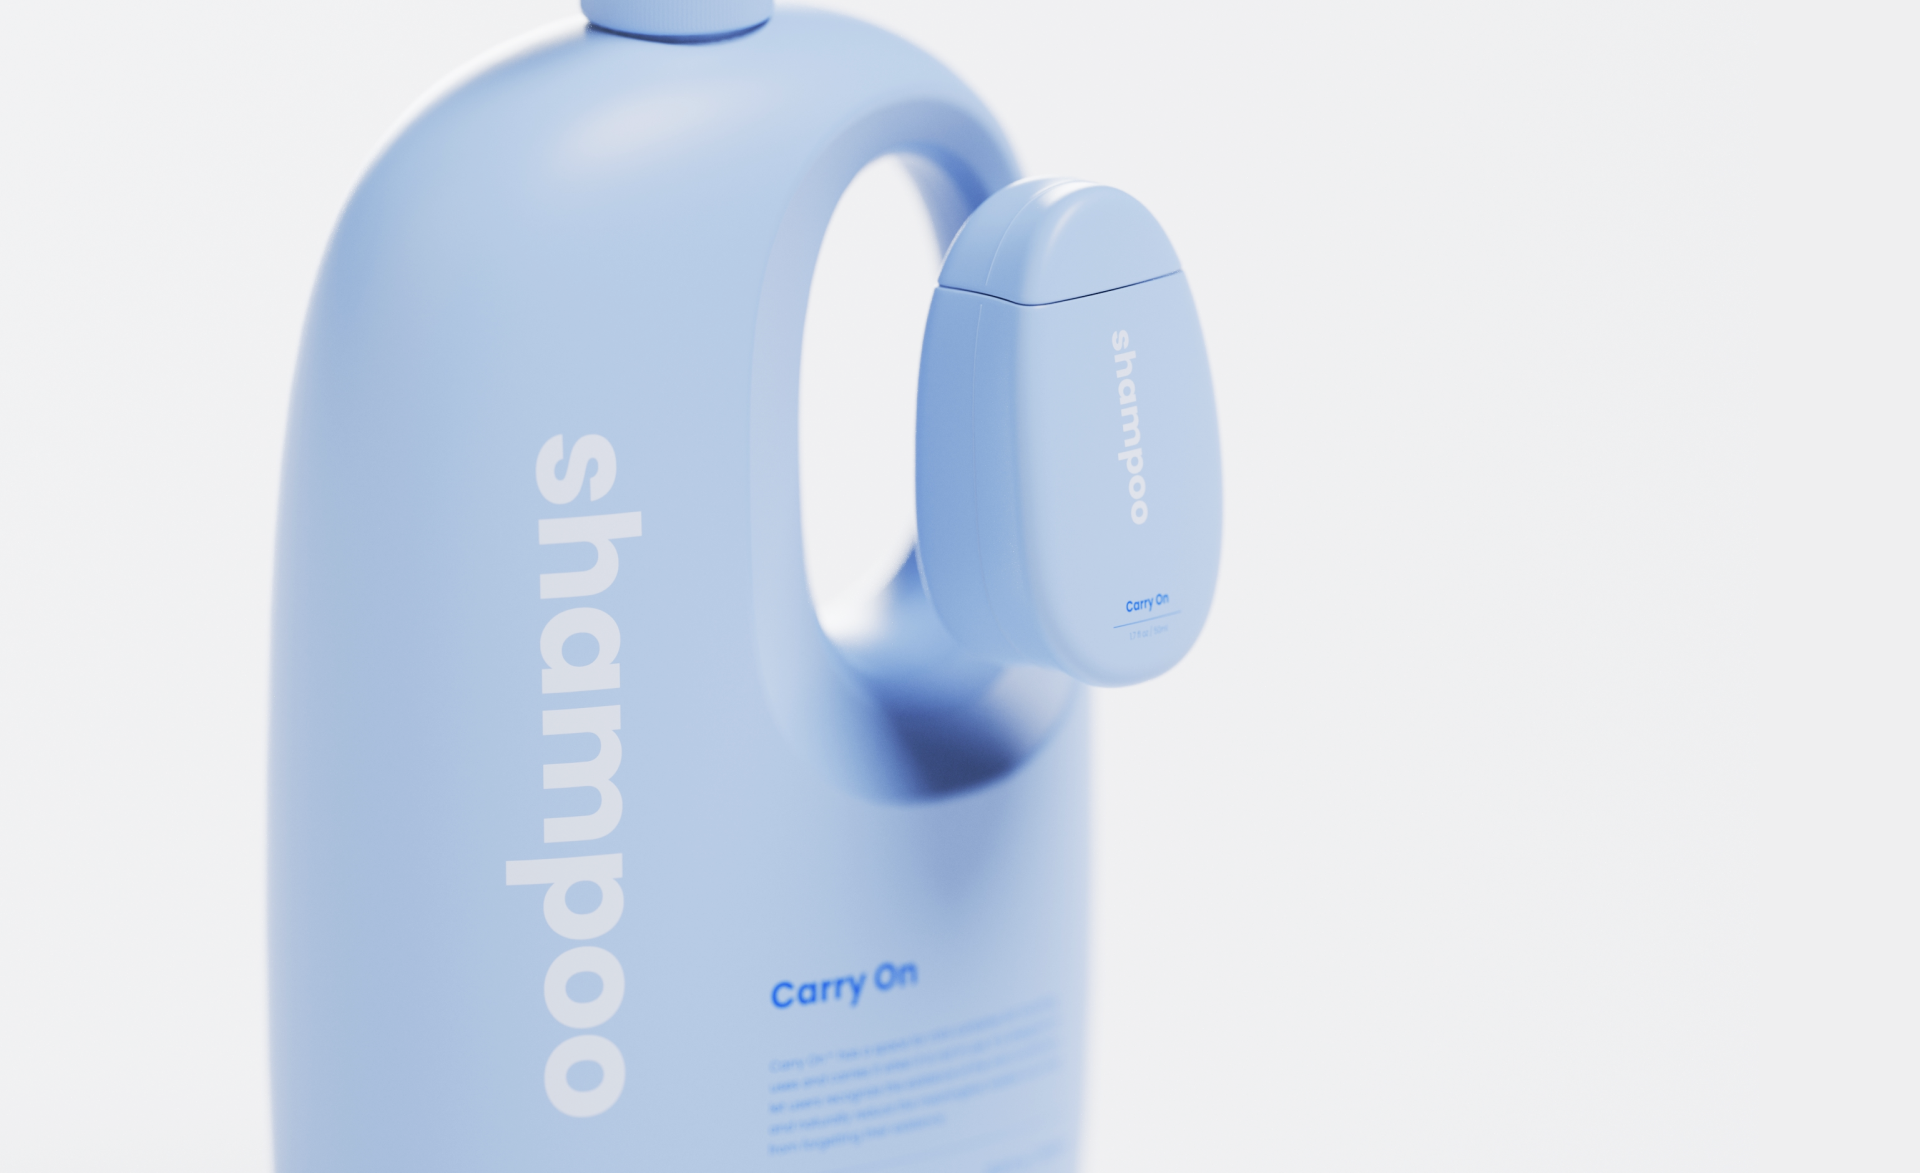 Carry On’s Pop-Out Travel-Size Shampoo Applies an Innovative “Donut Hole” Logic to Bath Products